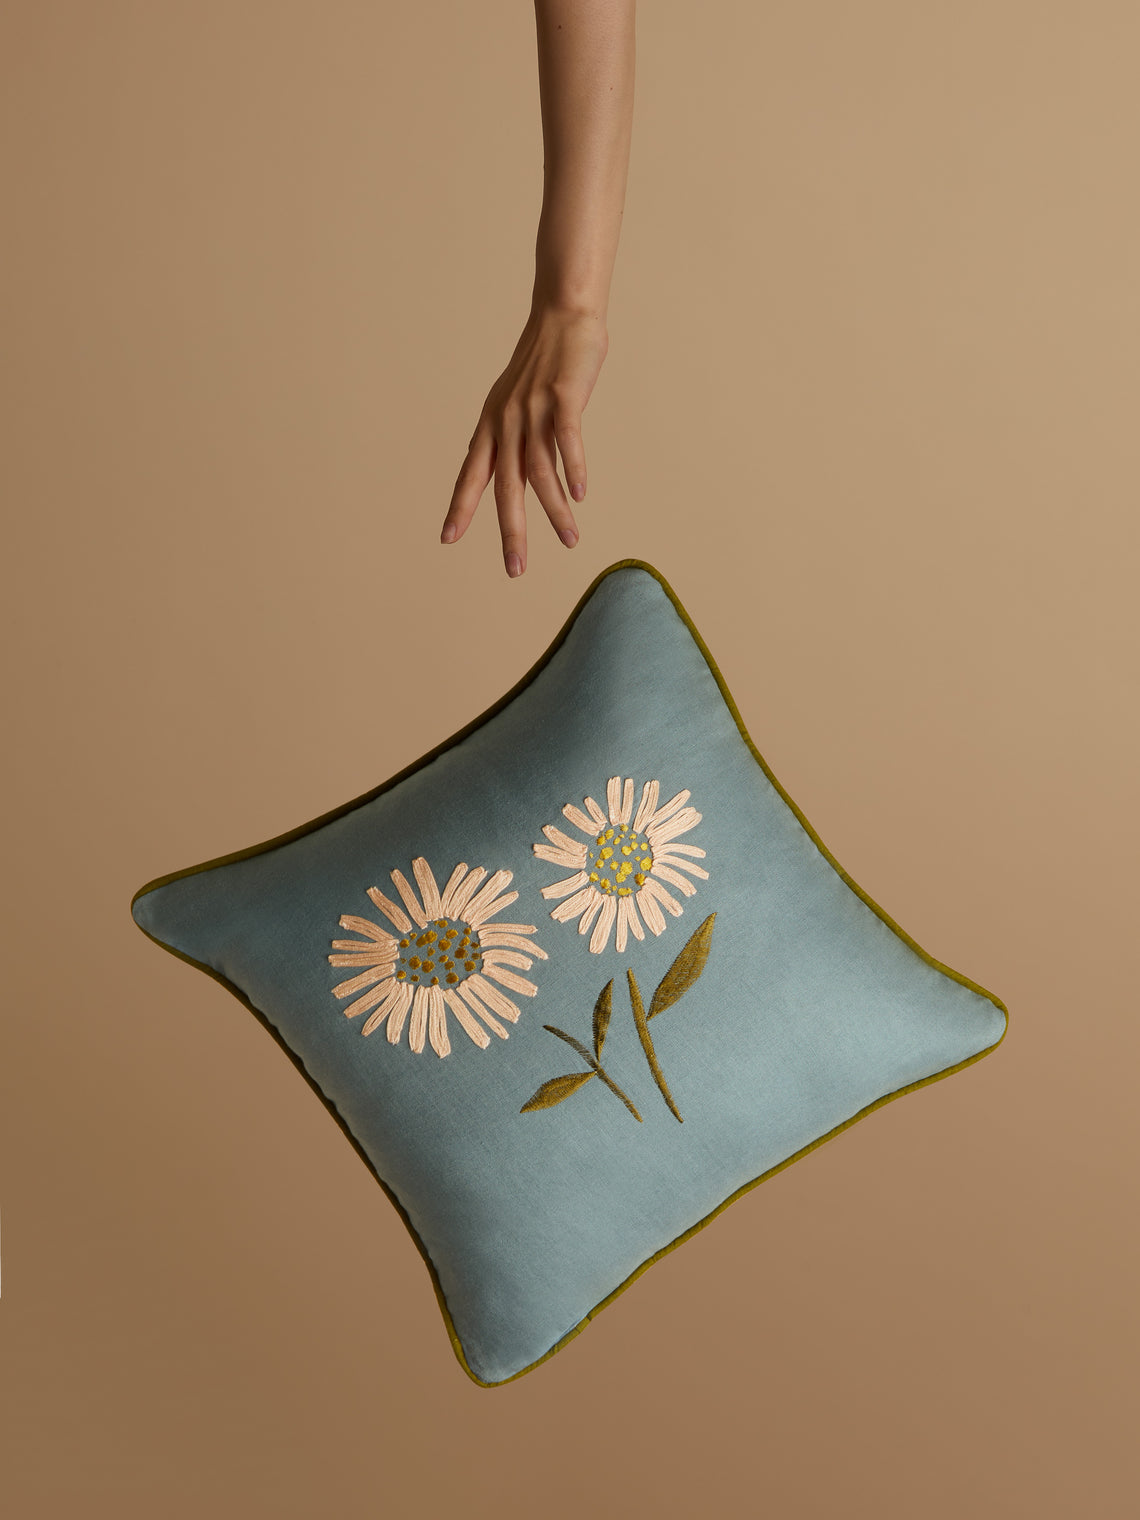 Lora Avedian - Aster Embroidered Linen Cushion -  - ABASK